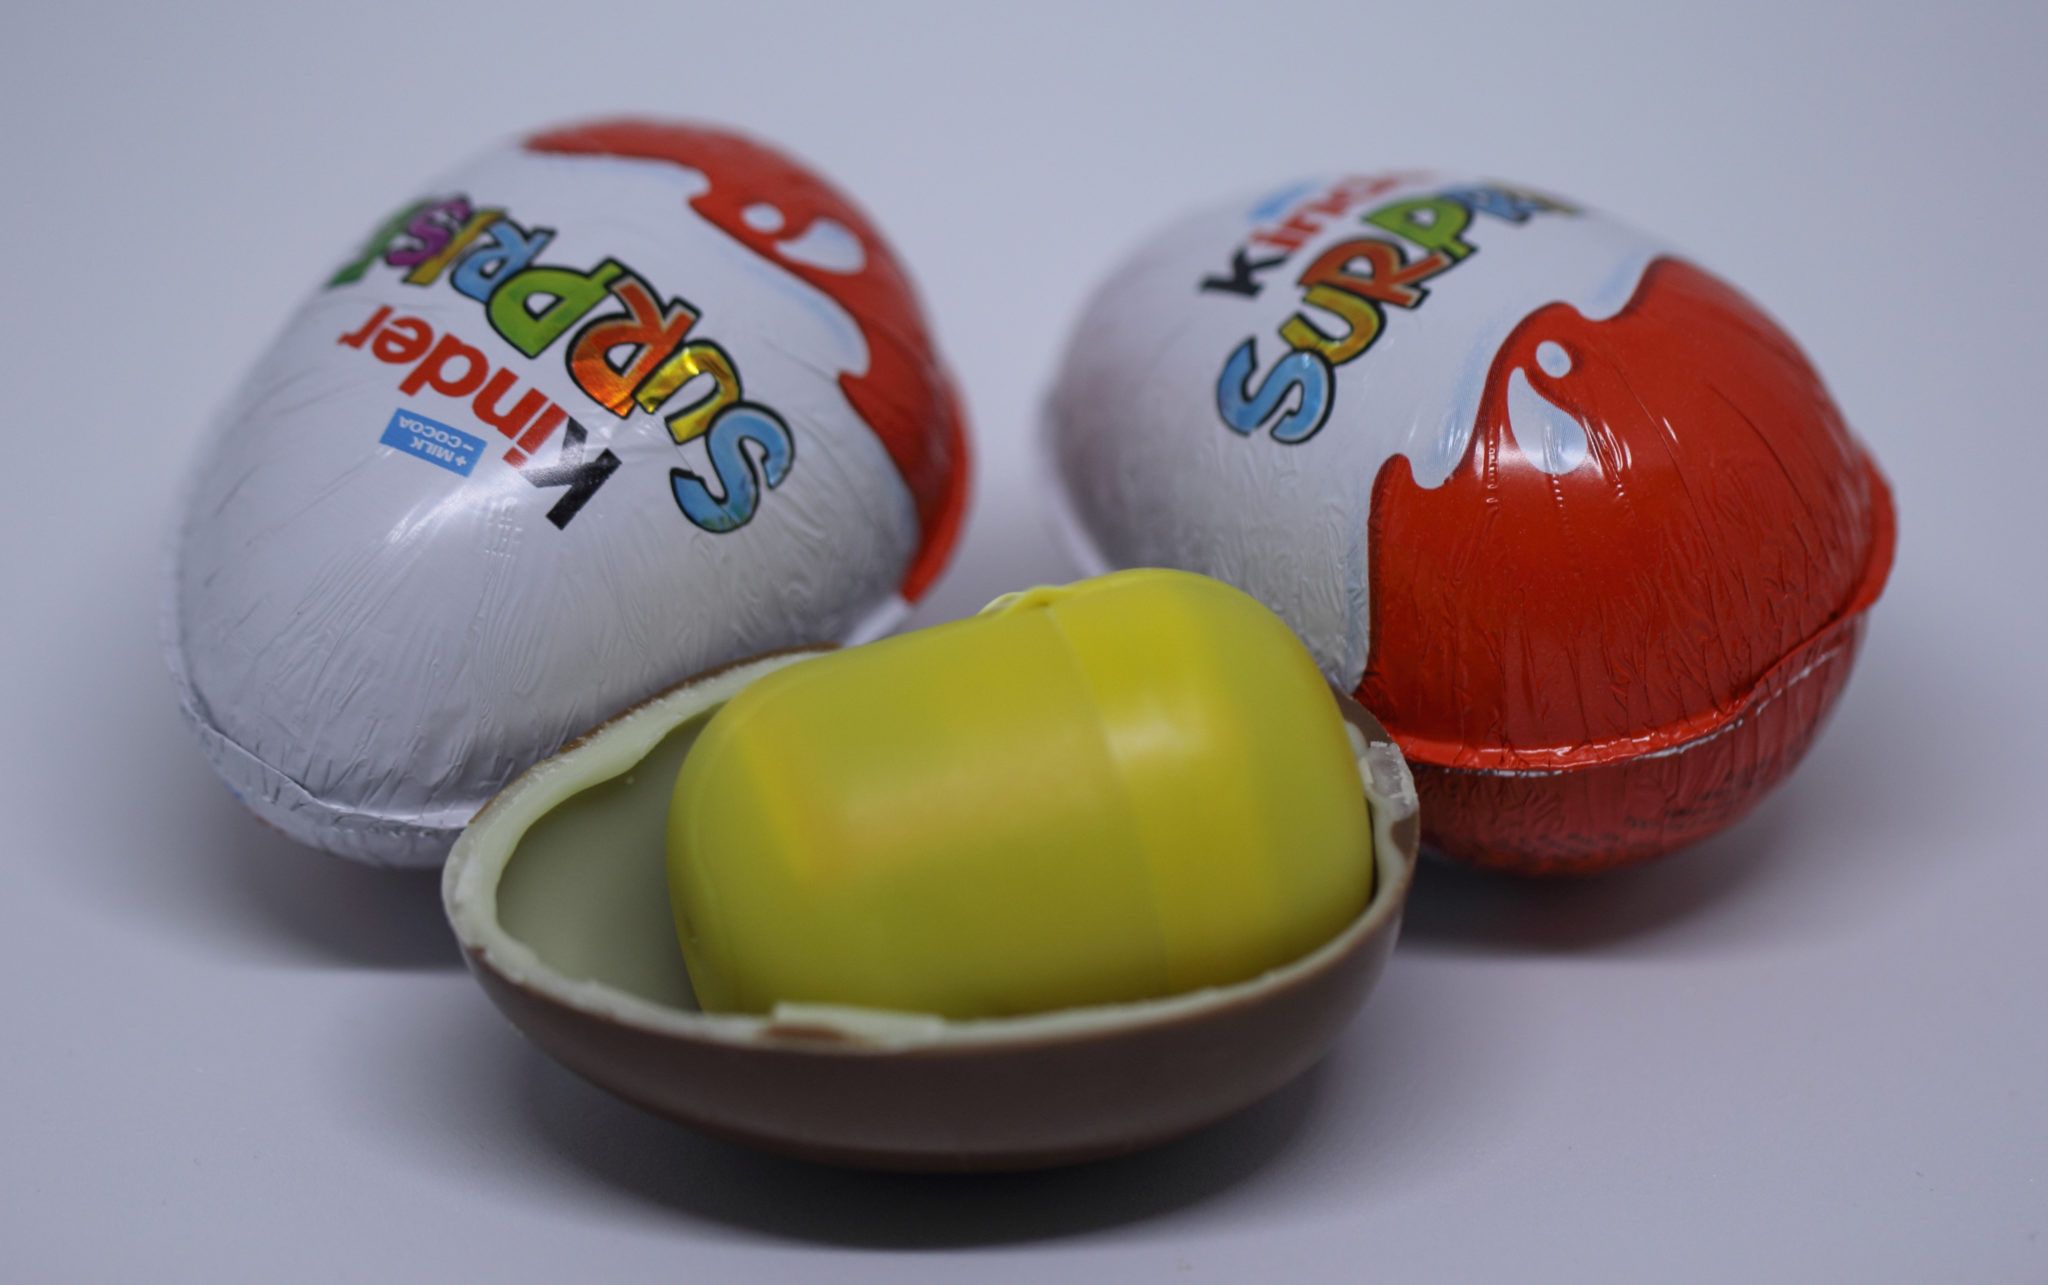 Kinder recall extended to more products over Salmonella fears